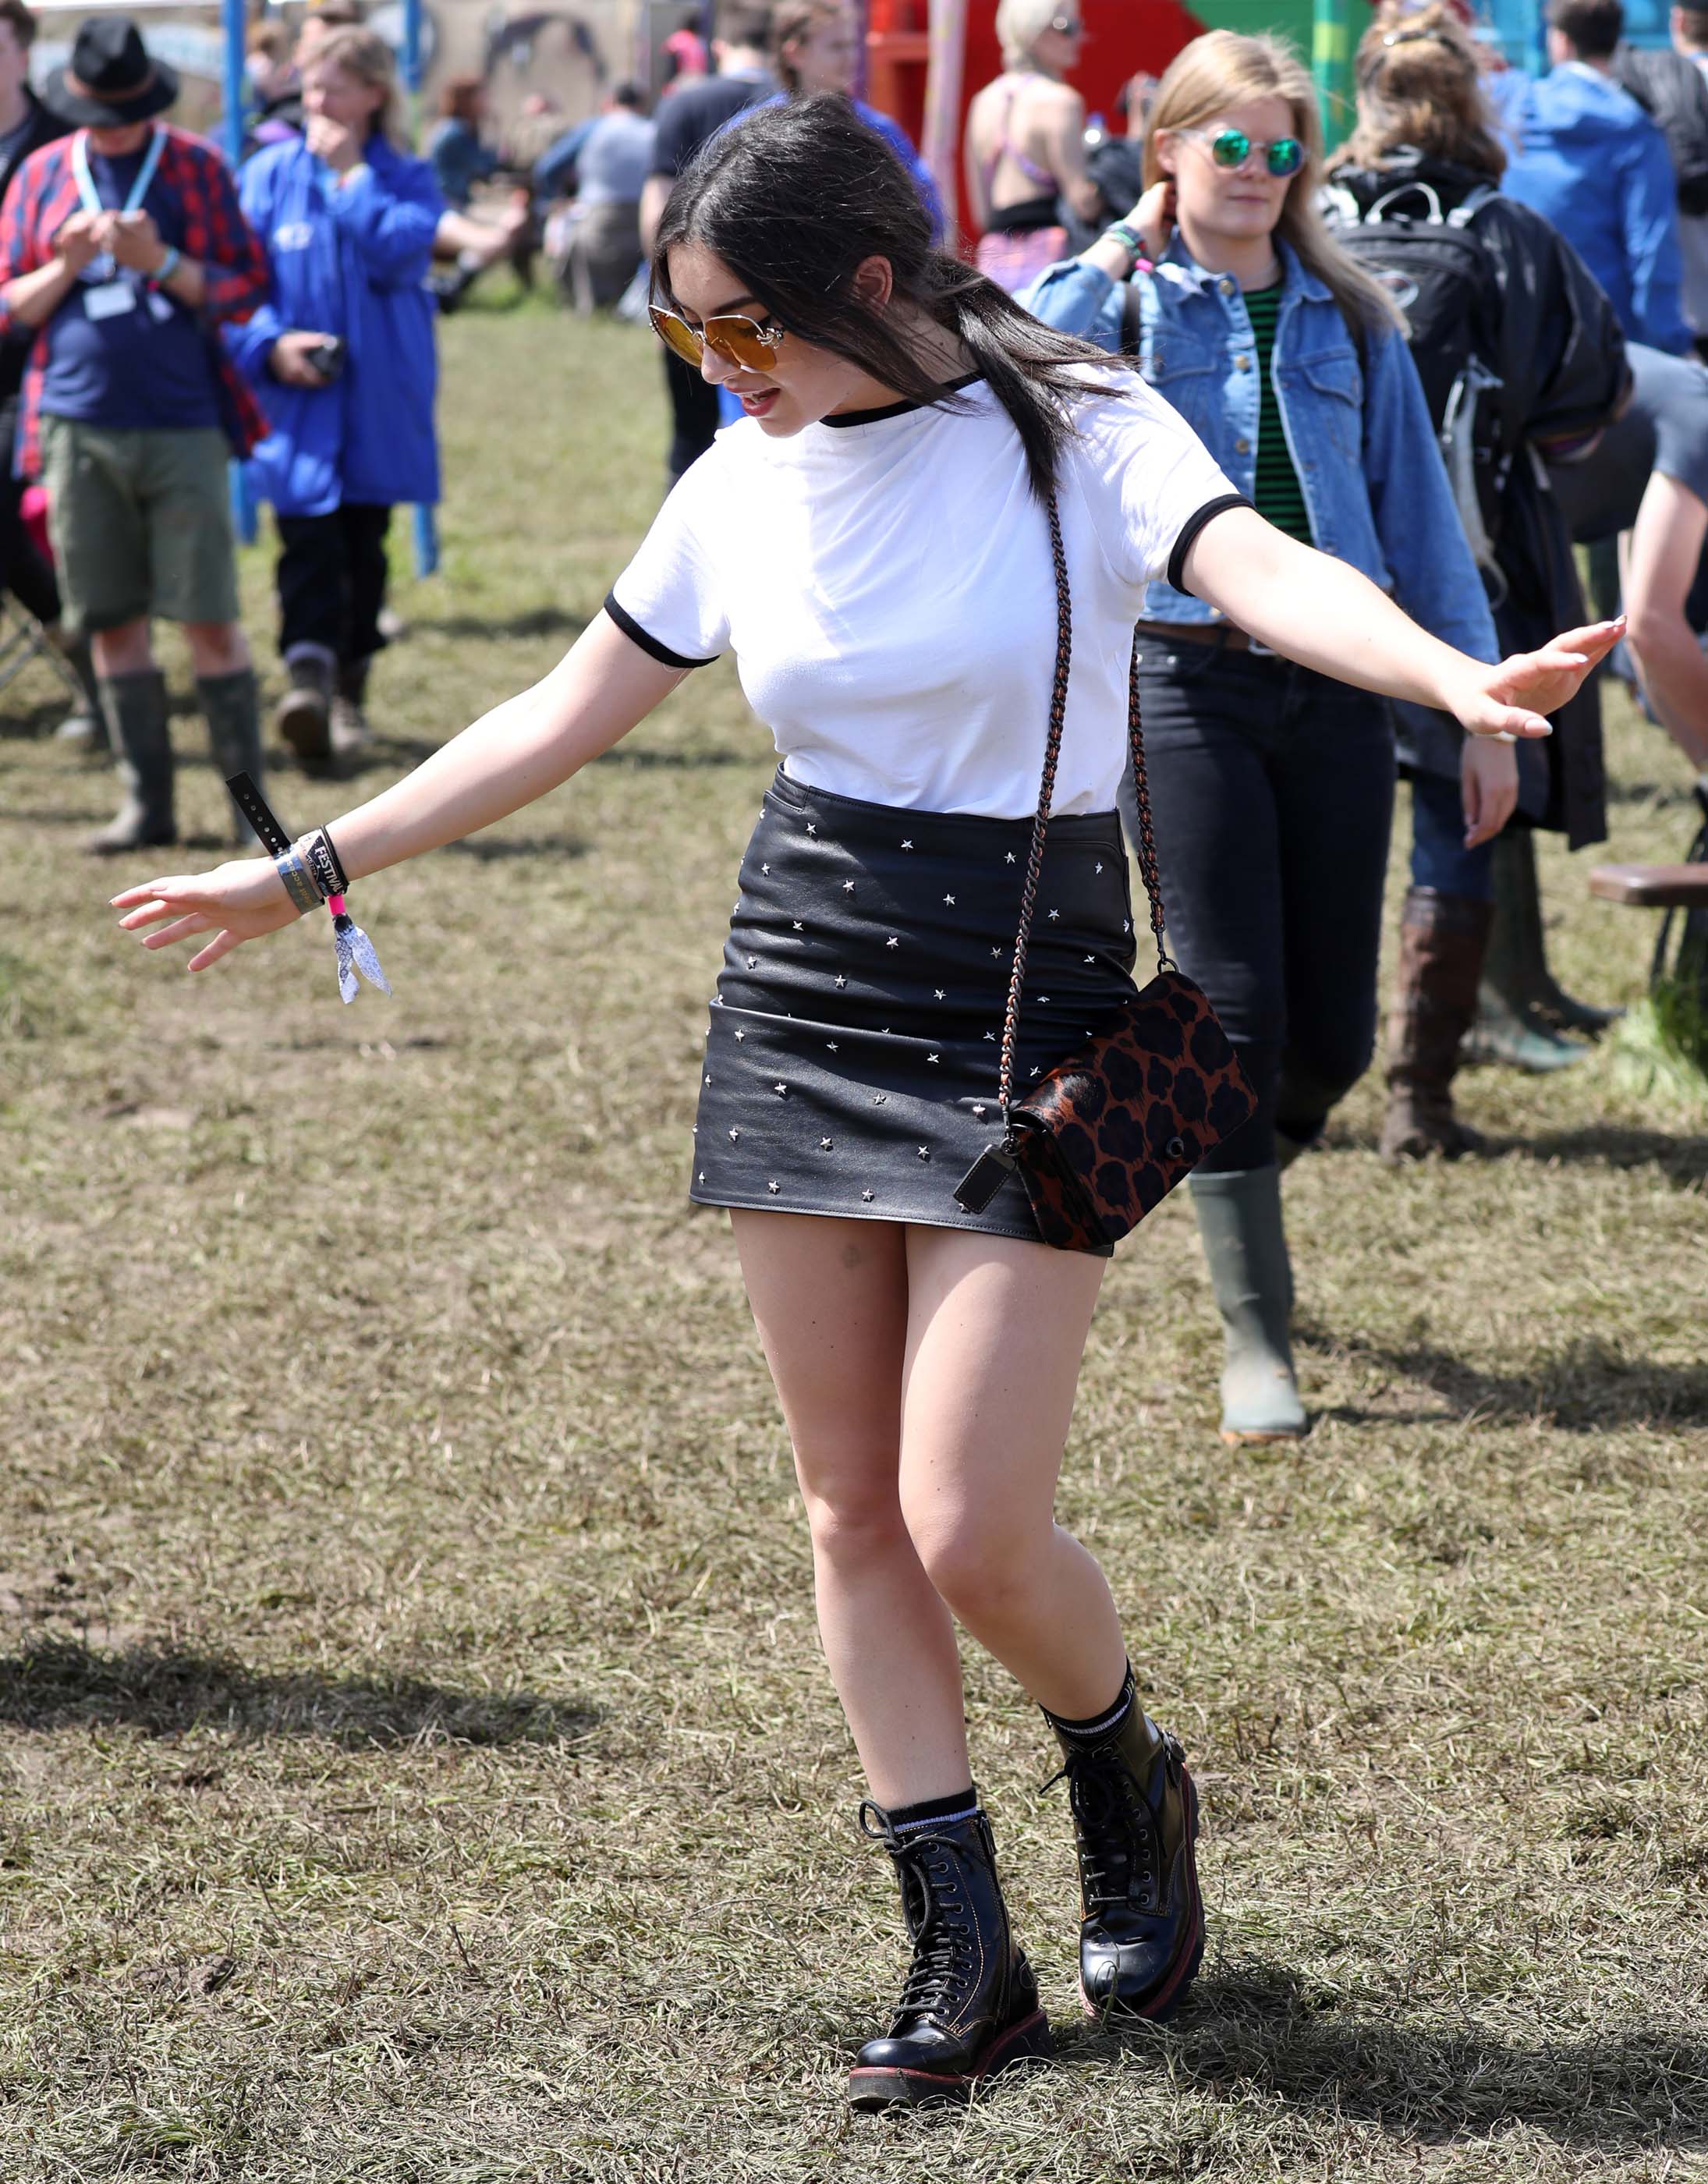 Charlie XCX wearing Coach attends the Glastonbury Festival